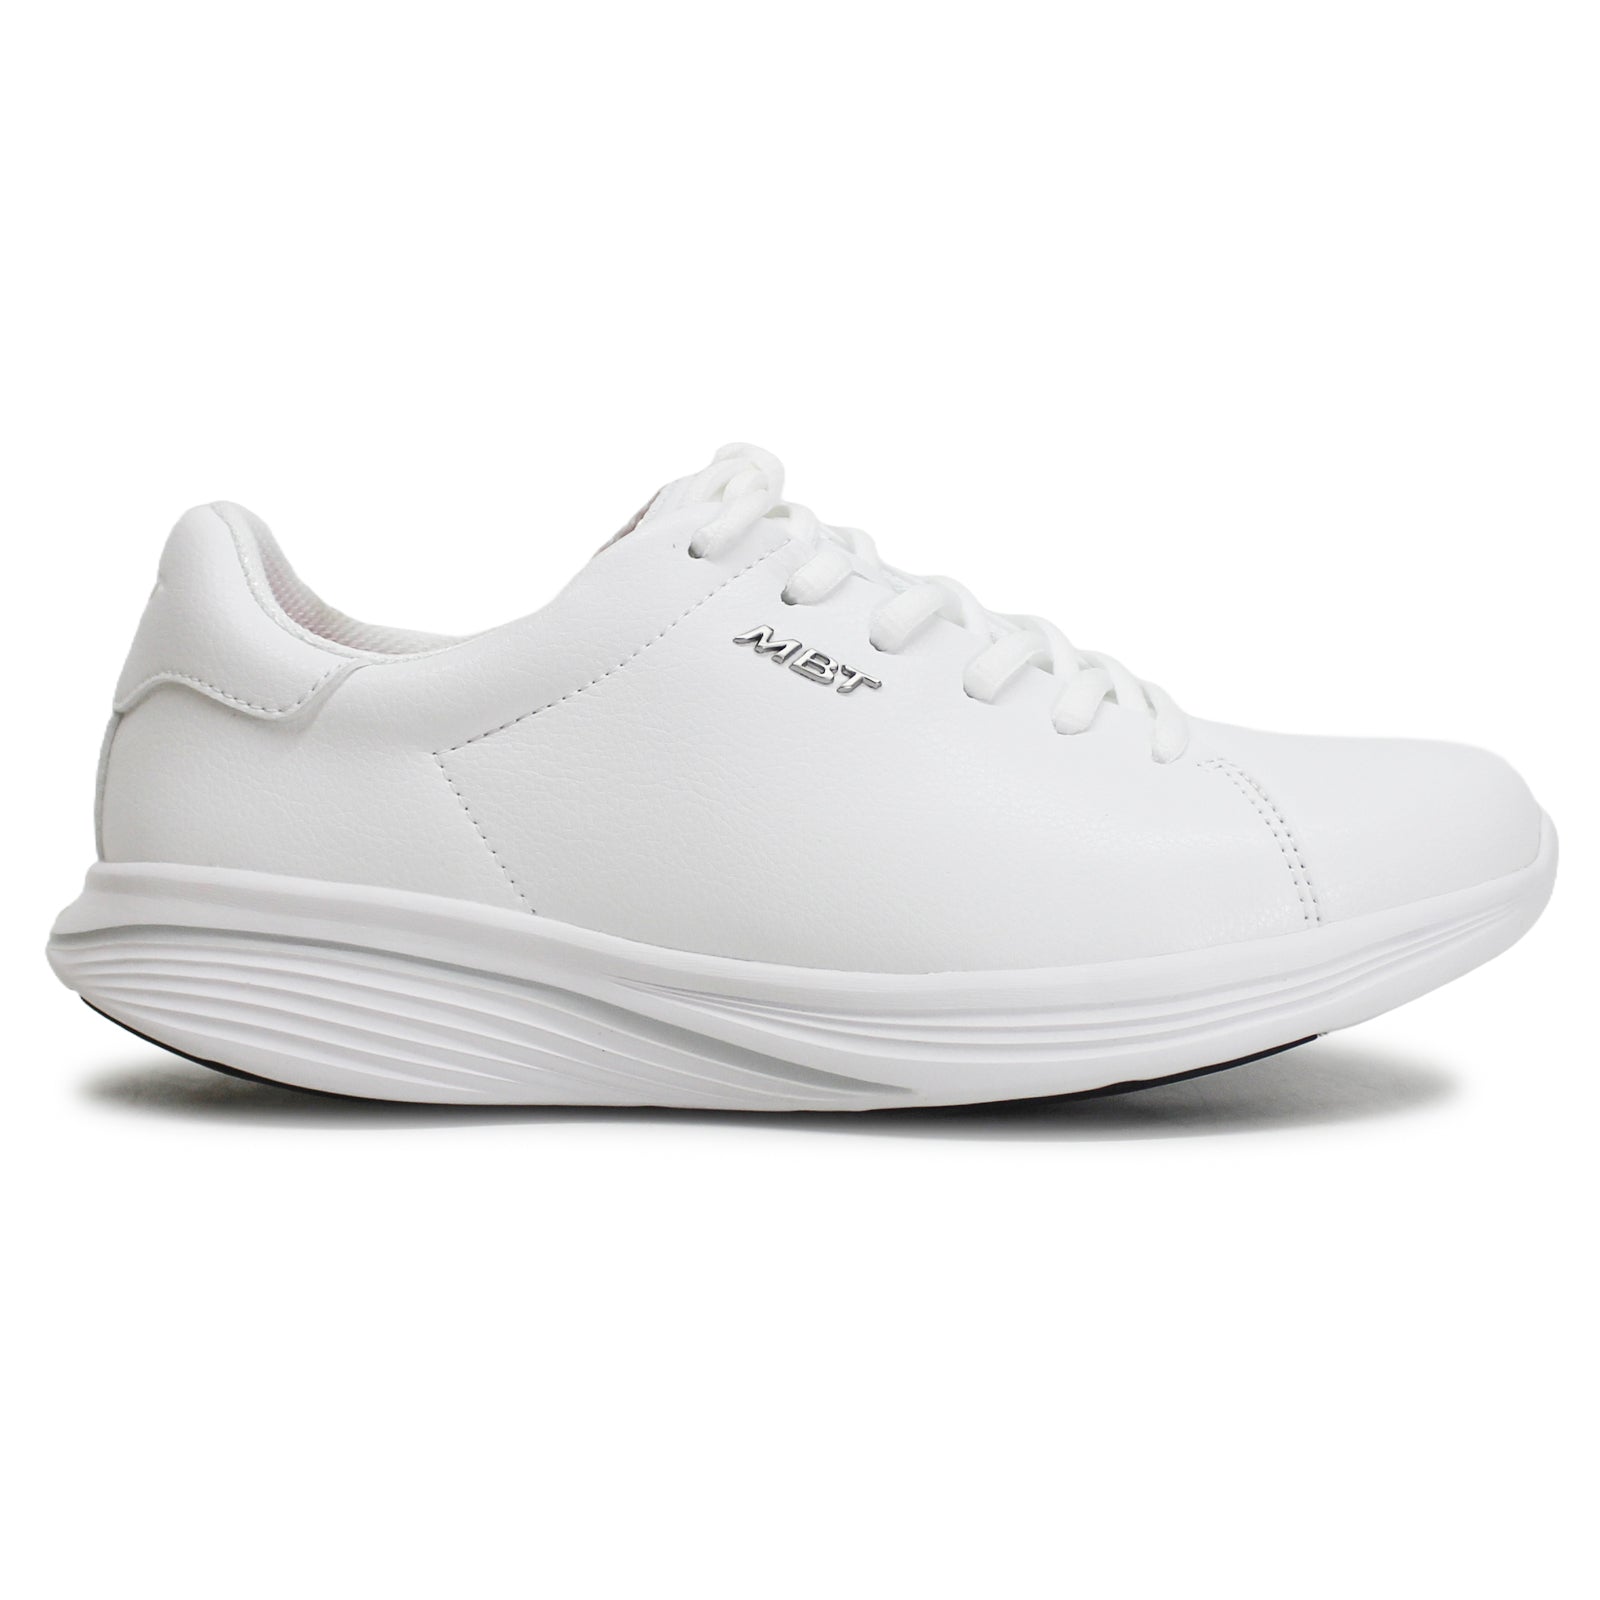 Kuni Synthetic Leather Women's Low Top Sneakers